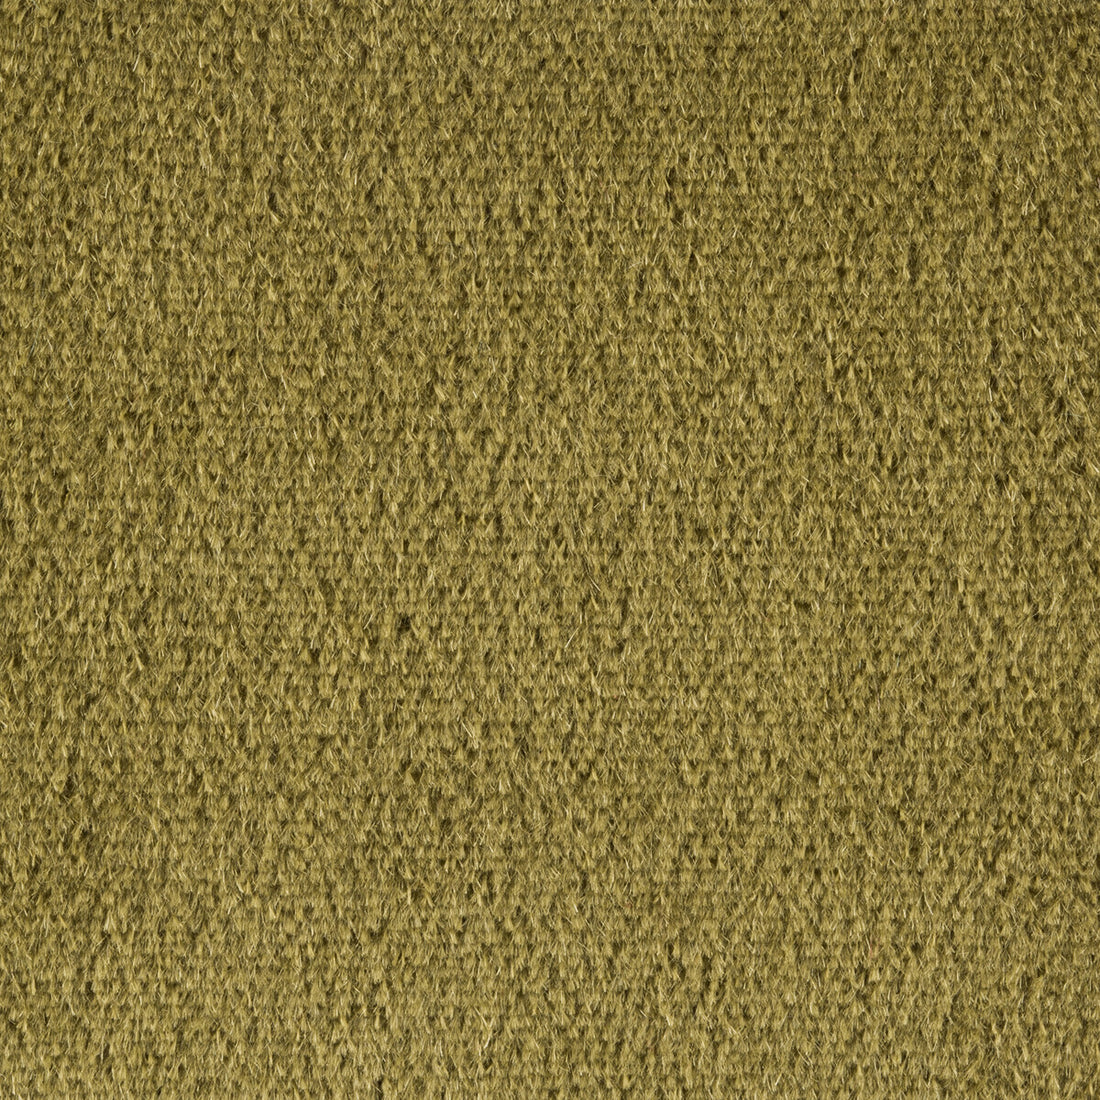 Autun Mohair Velvet fabric in olive color - pattern BR-89778.458.0 - by Brunschwig &amp; Fils